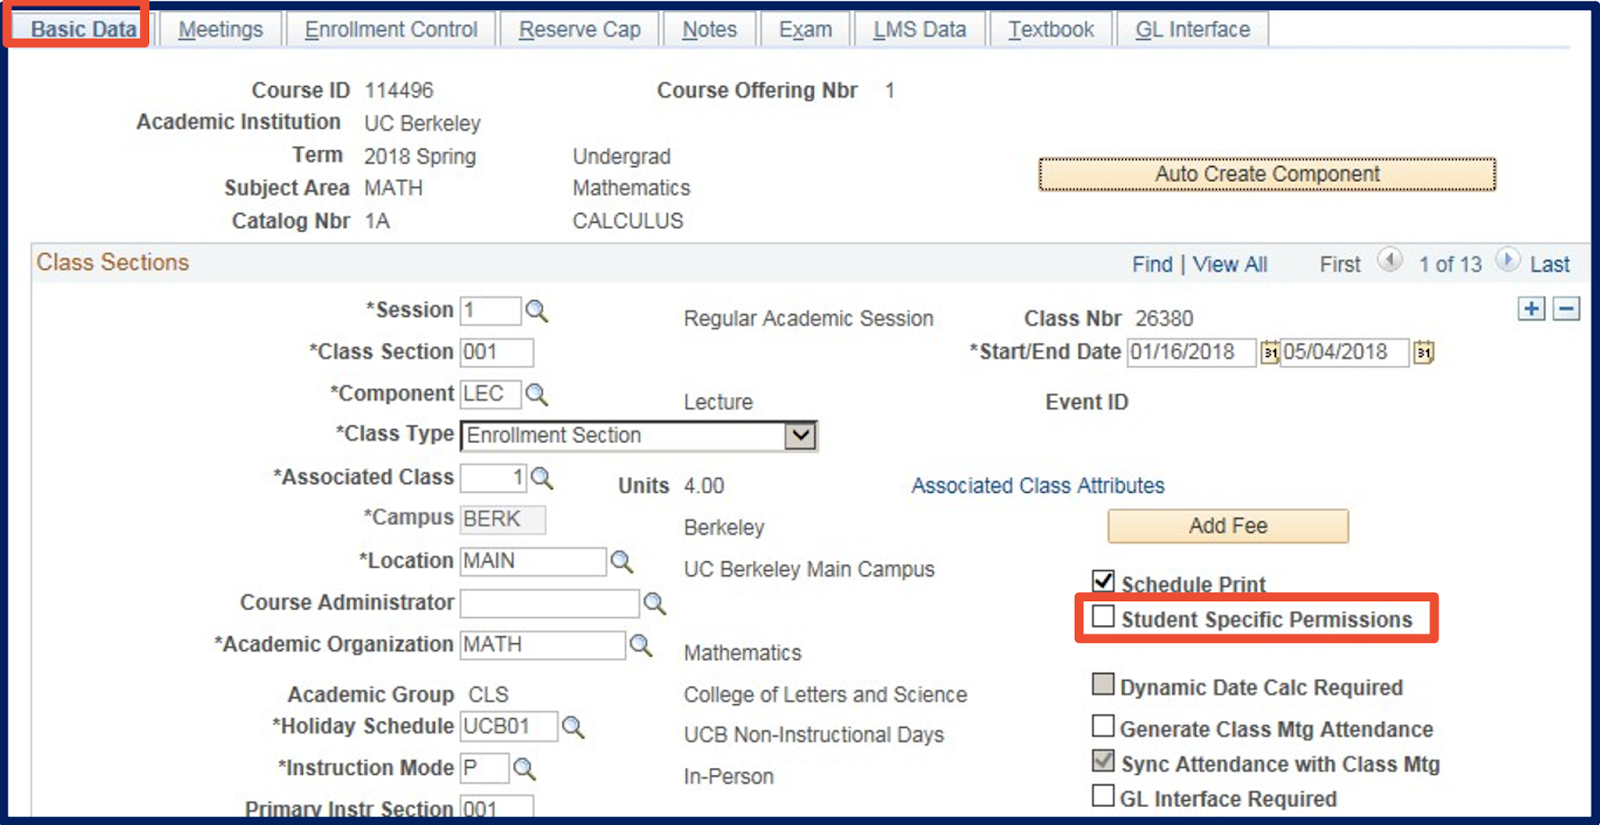 If the Student Specific Permissions is not selected, permisiion numbers will be used